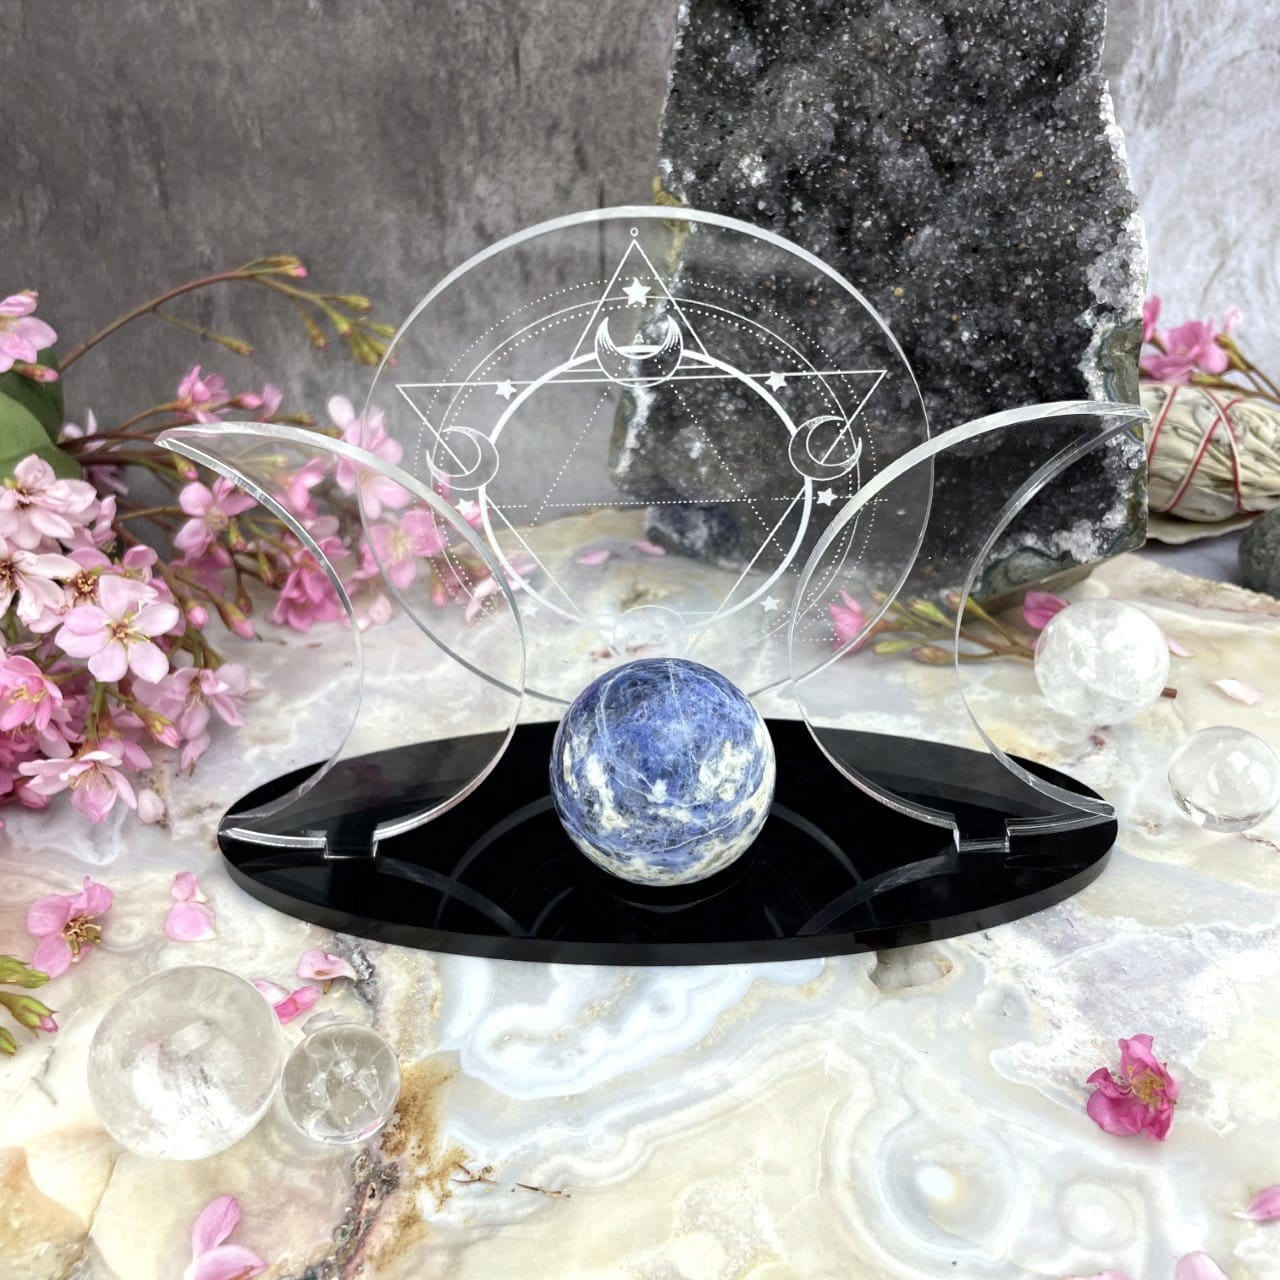 Front facing Acrylic Sphere Holder Sacred Geometry - 6 Pointed Star holding a sphere in an alter that consists of flowers and crystals.